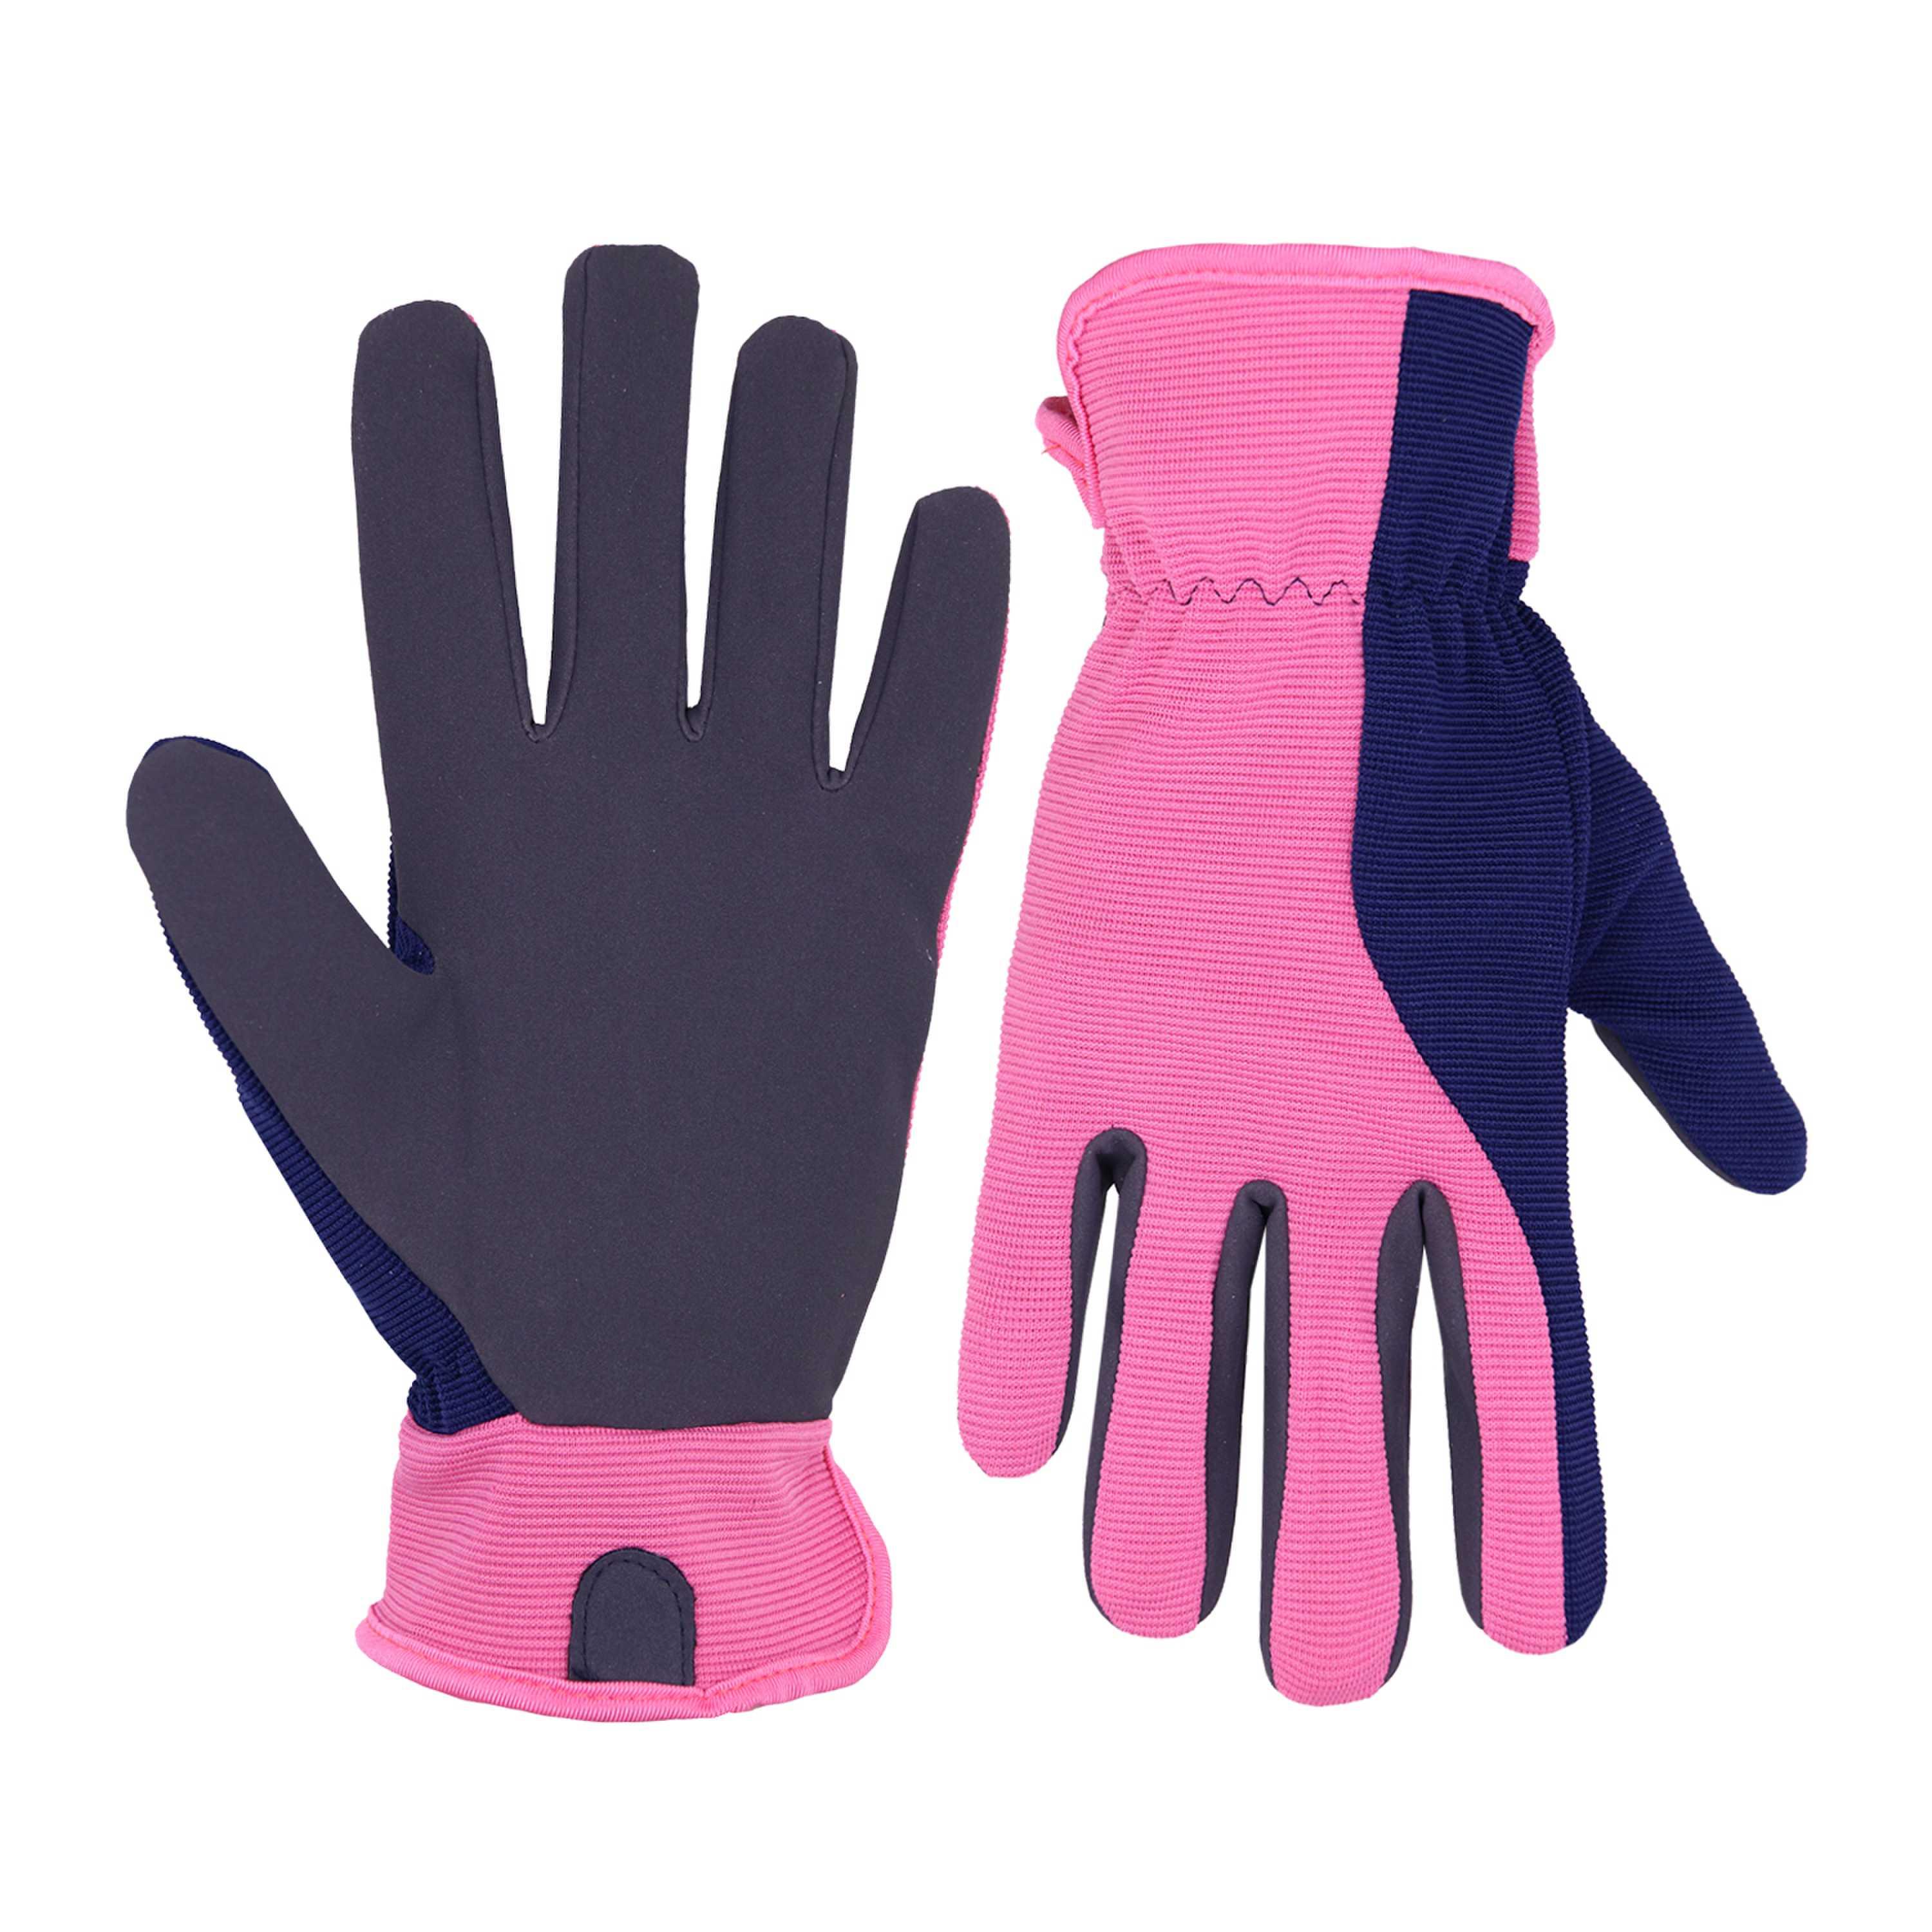 3110 PRISAFETY Light Duty Mechanic Yard Automotive leather driving Repair Garden Working Safety Gloves for Ladies